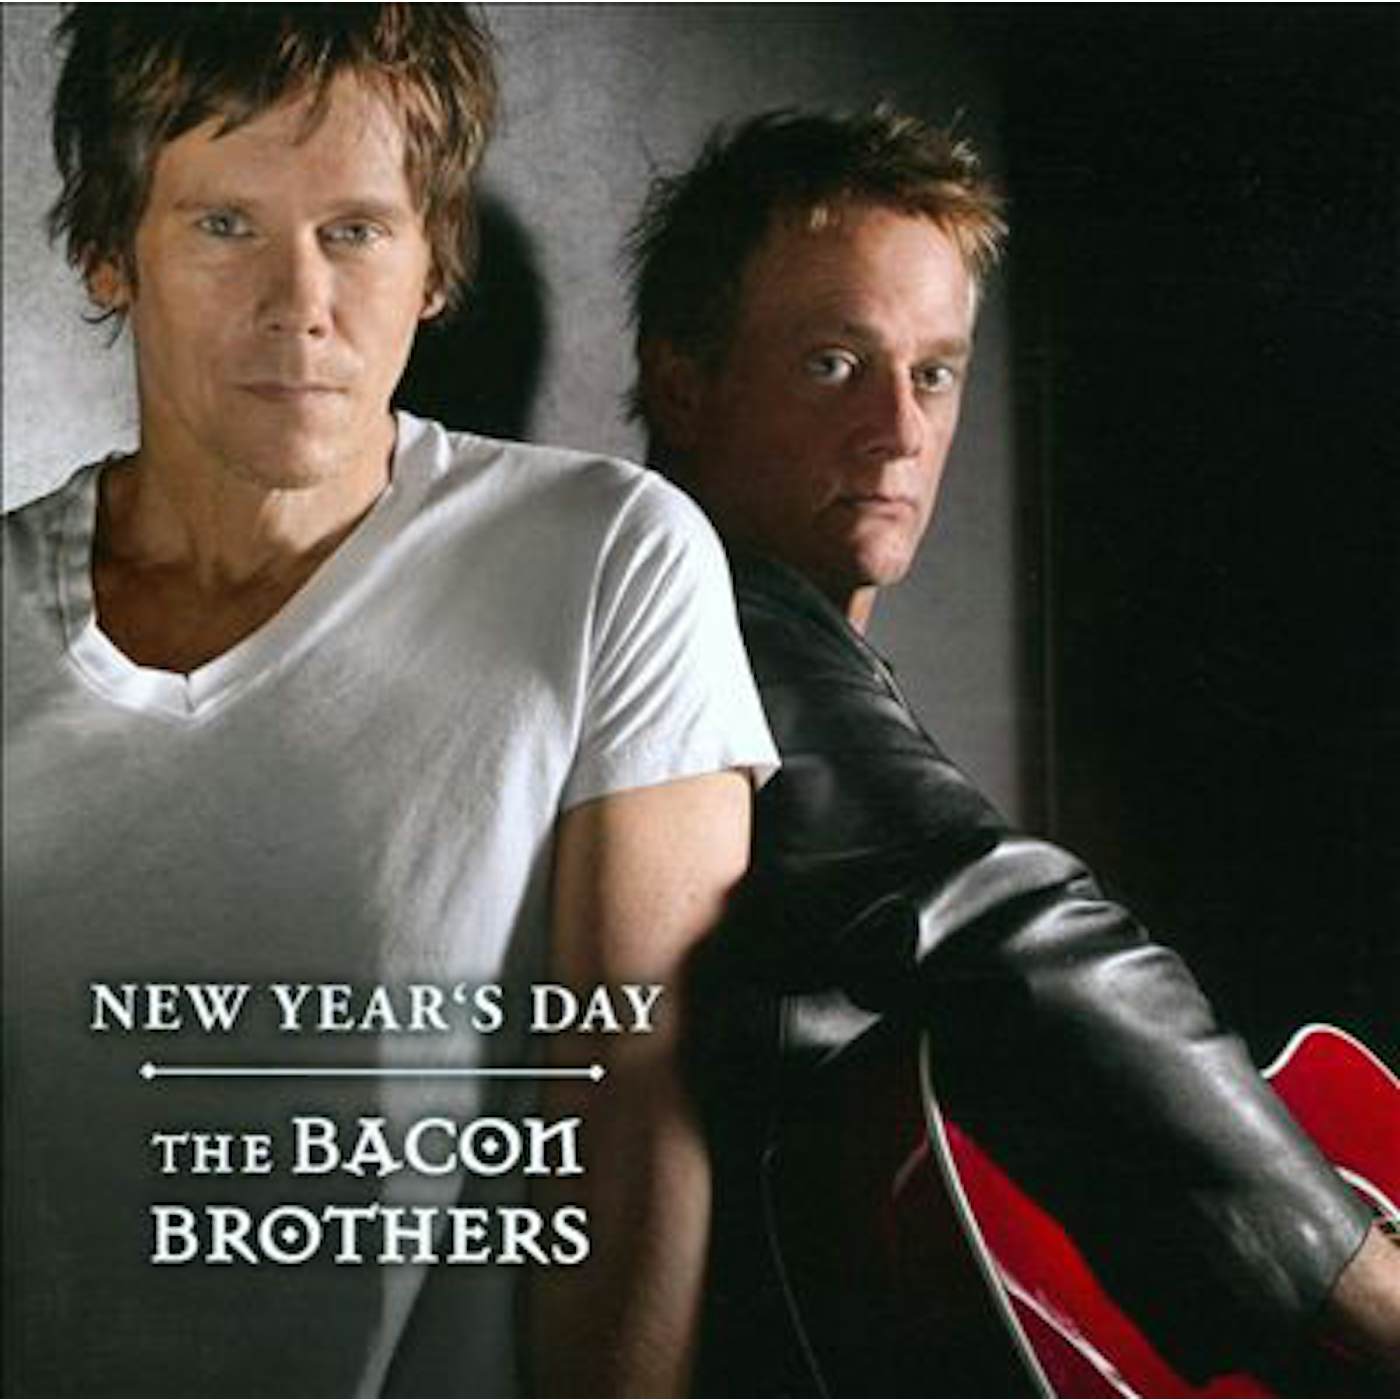 The Bacon Brothers NEW YEAR'S DAY CD